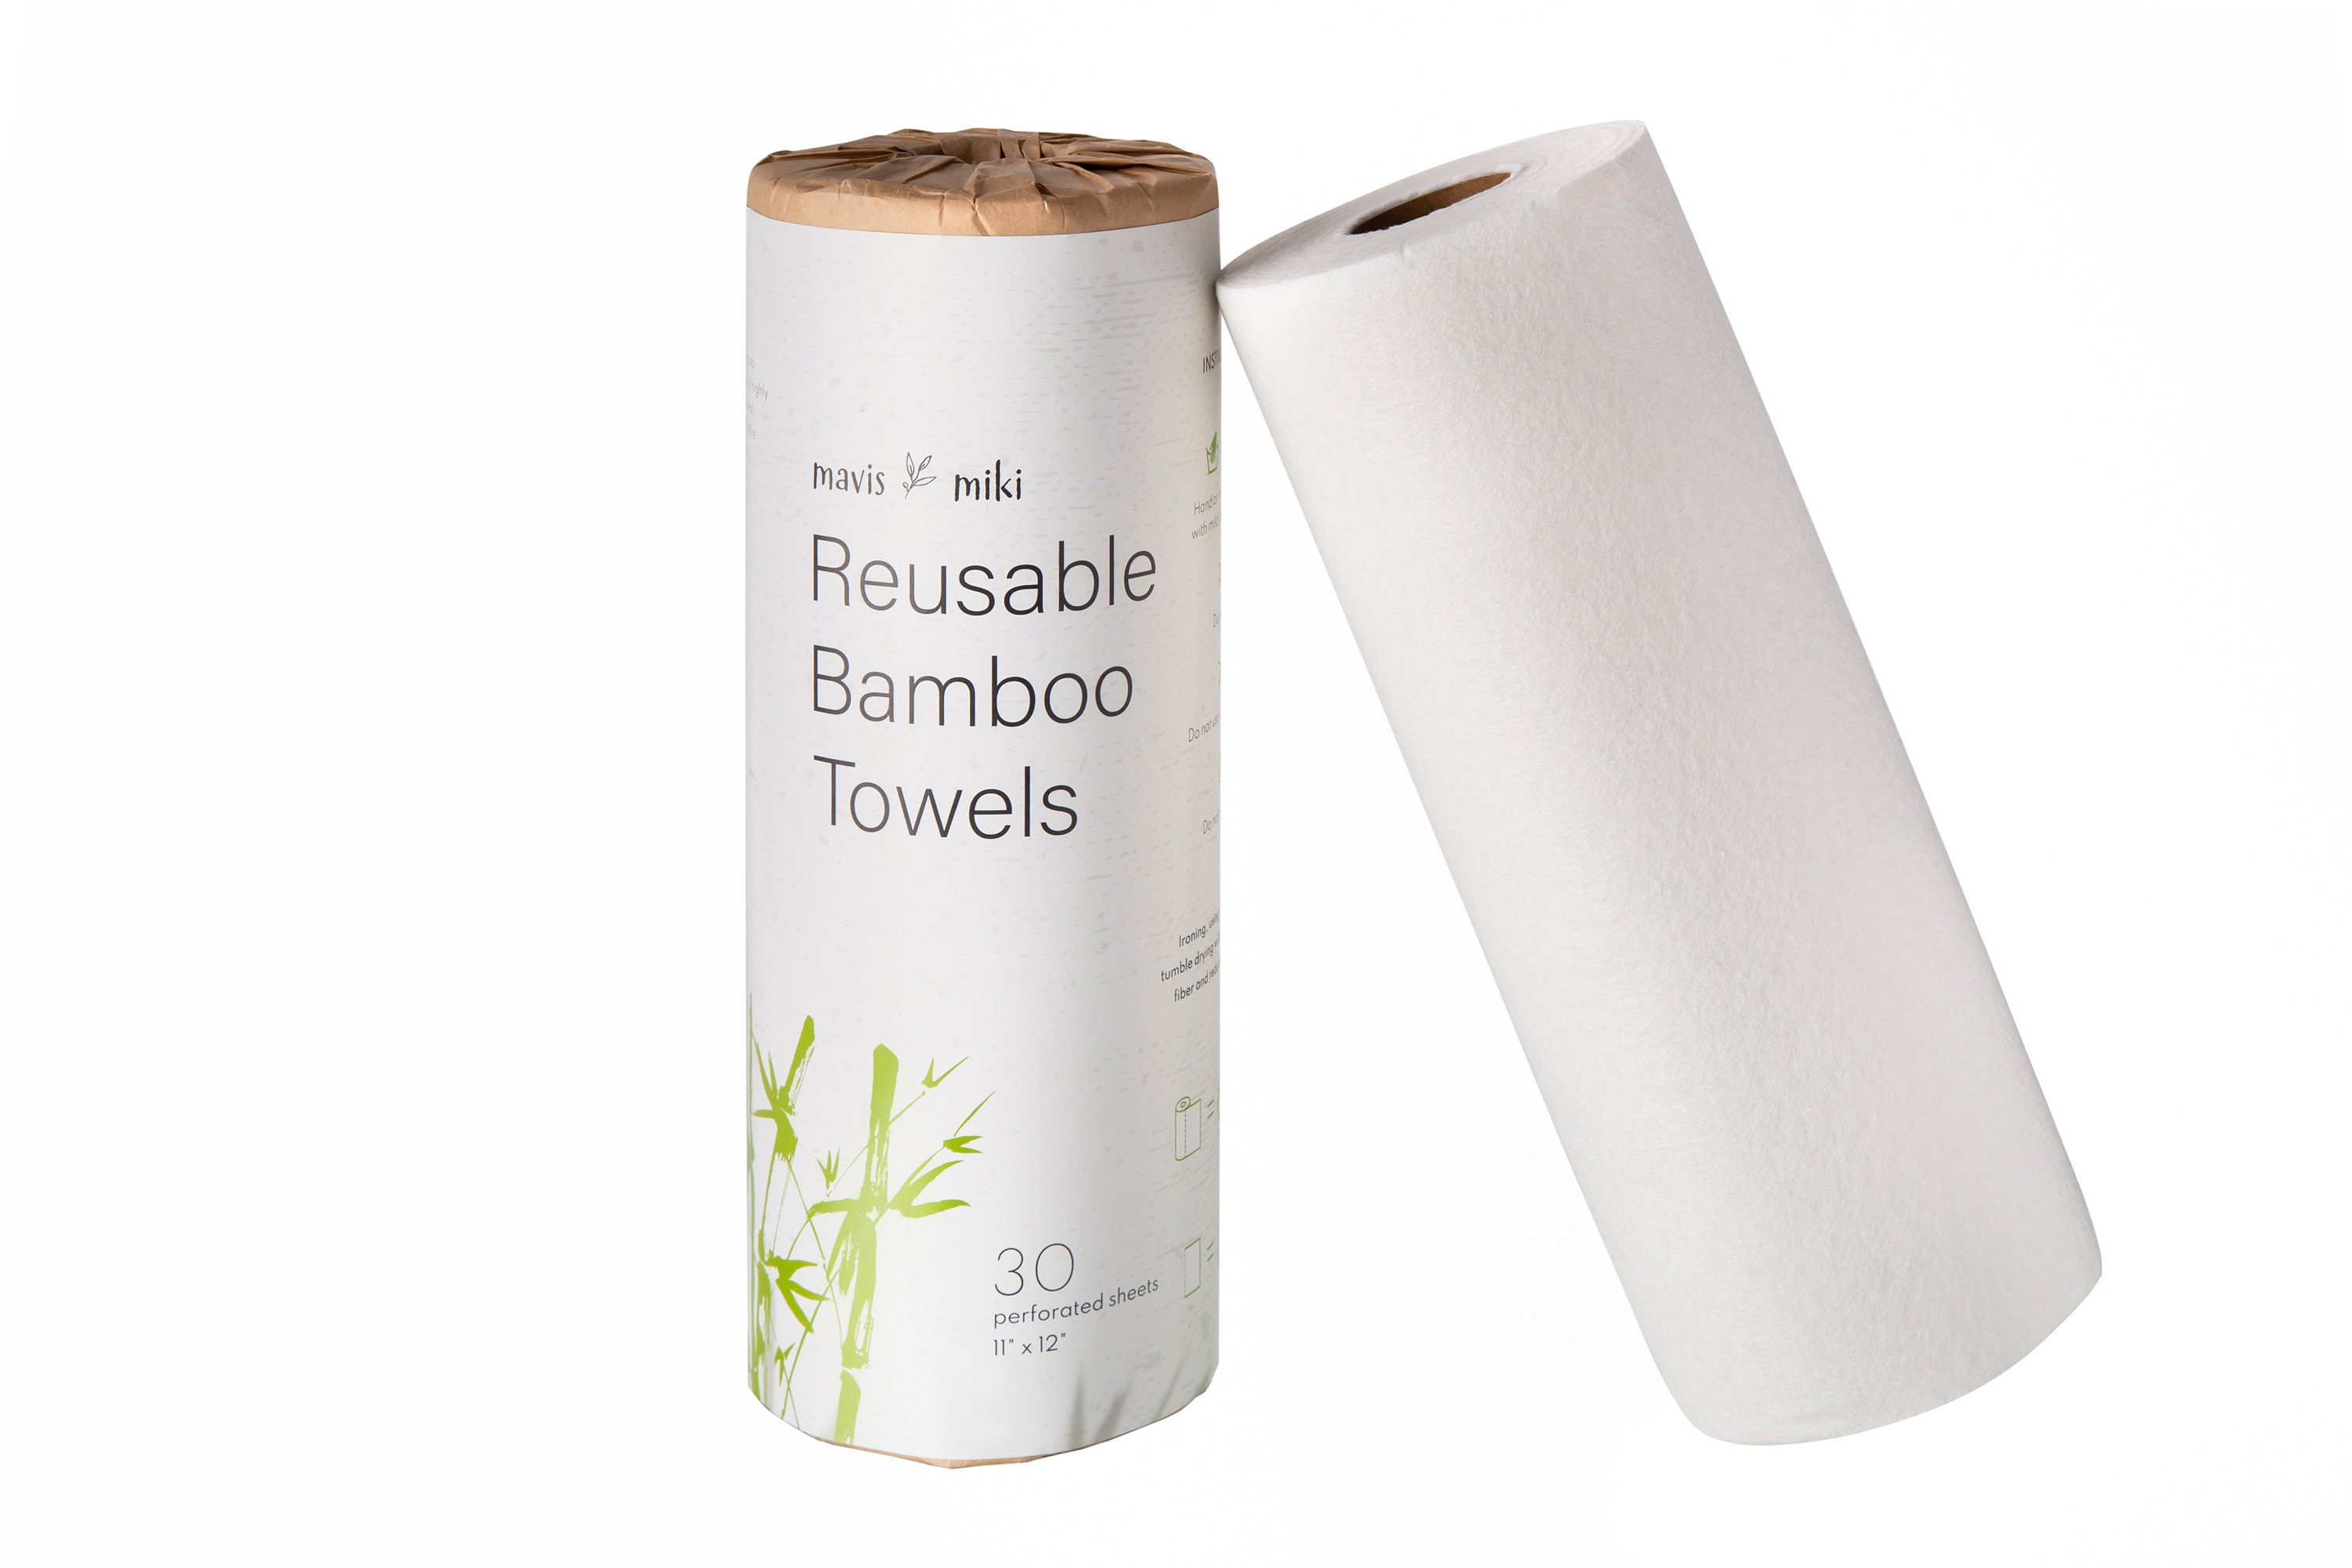 Reusable Bamboo Towels by MAVIS MIKI 2-roll Set, 40 Sheets Heavy Duty,  Washable & Reusable, Money Saving, Kitchen Paper Replacement 